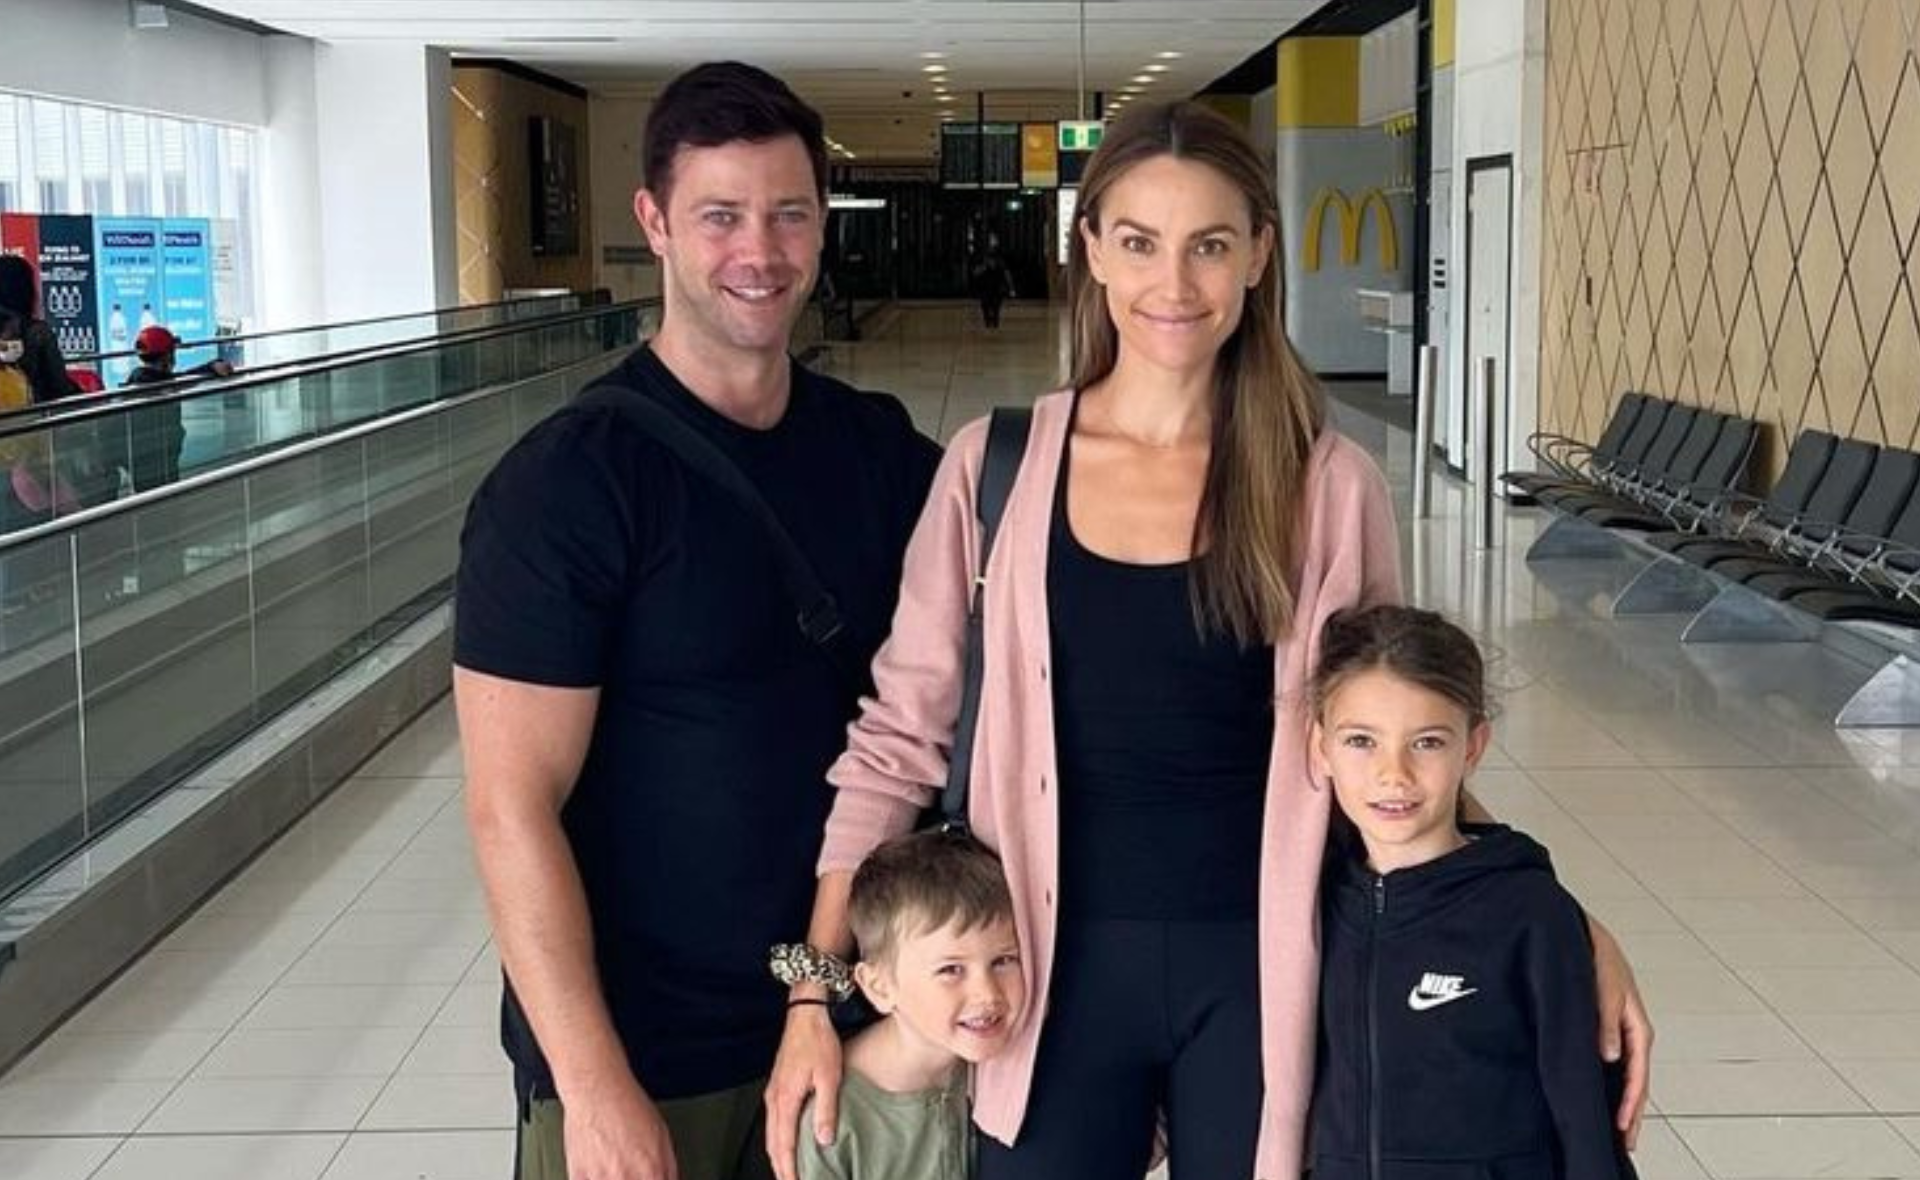 Rachael Finch updates fans on her children’s wellbeing after her home was invaded in night